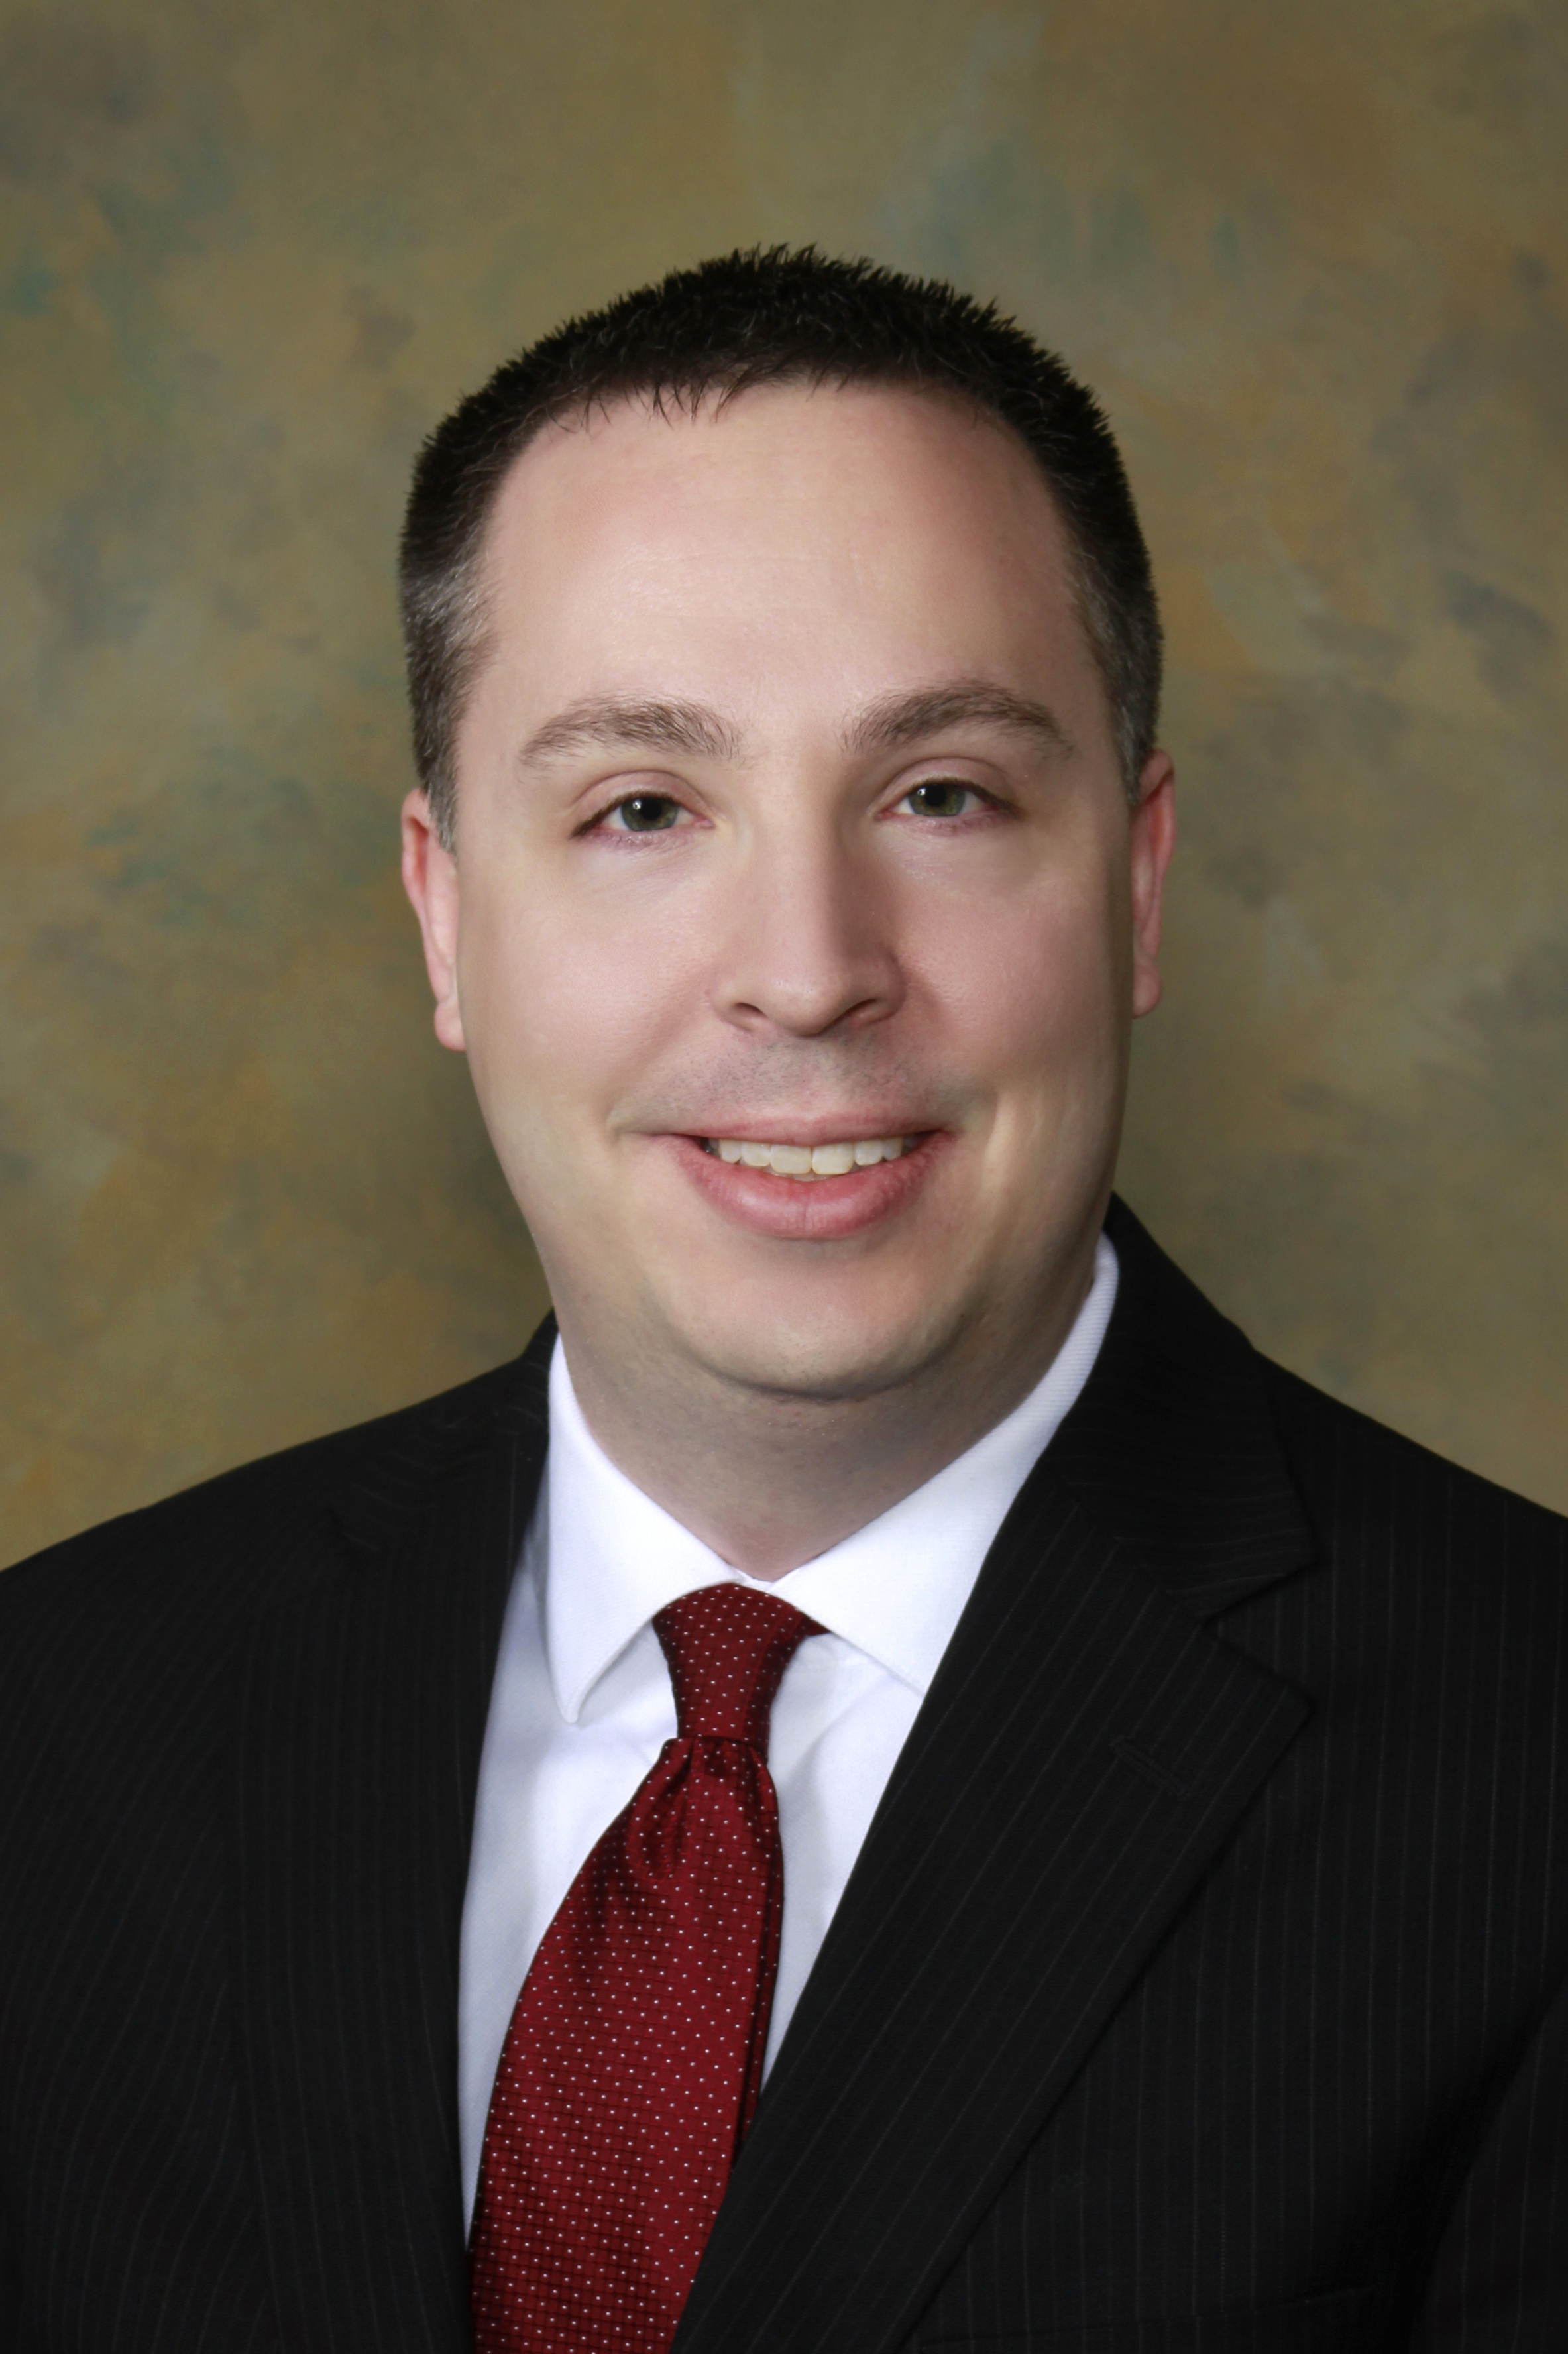 DUI Attorney Andrew Hoverman - Anne Arundel County, MD - DUIAttorney.com